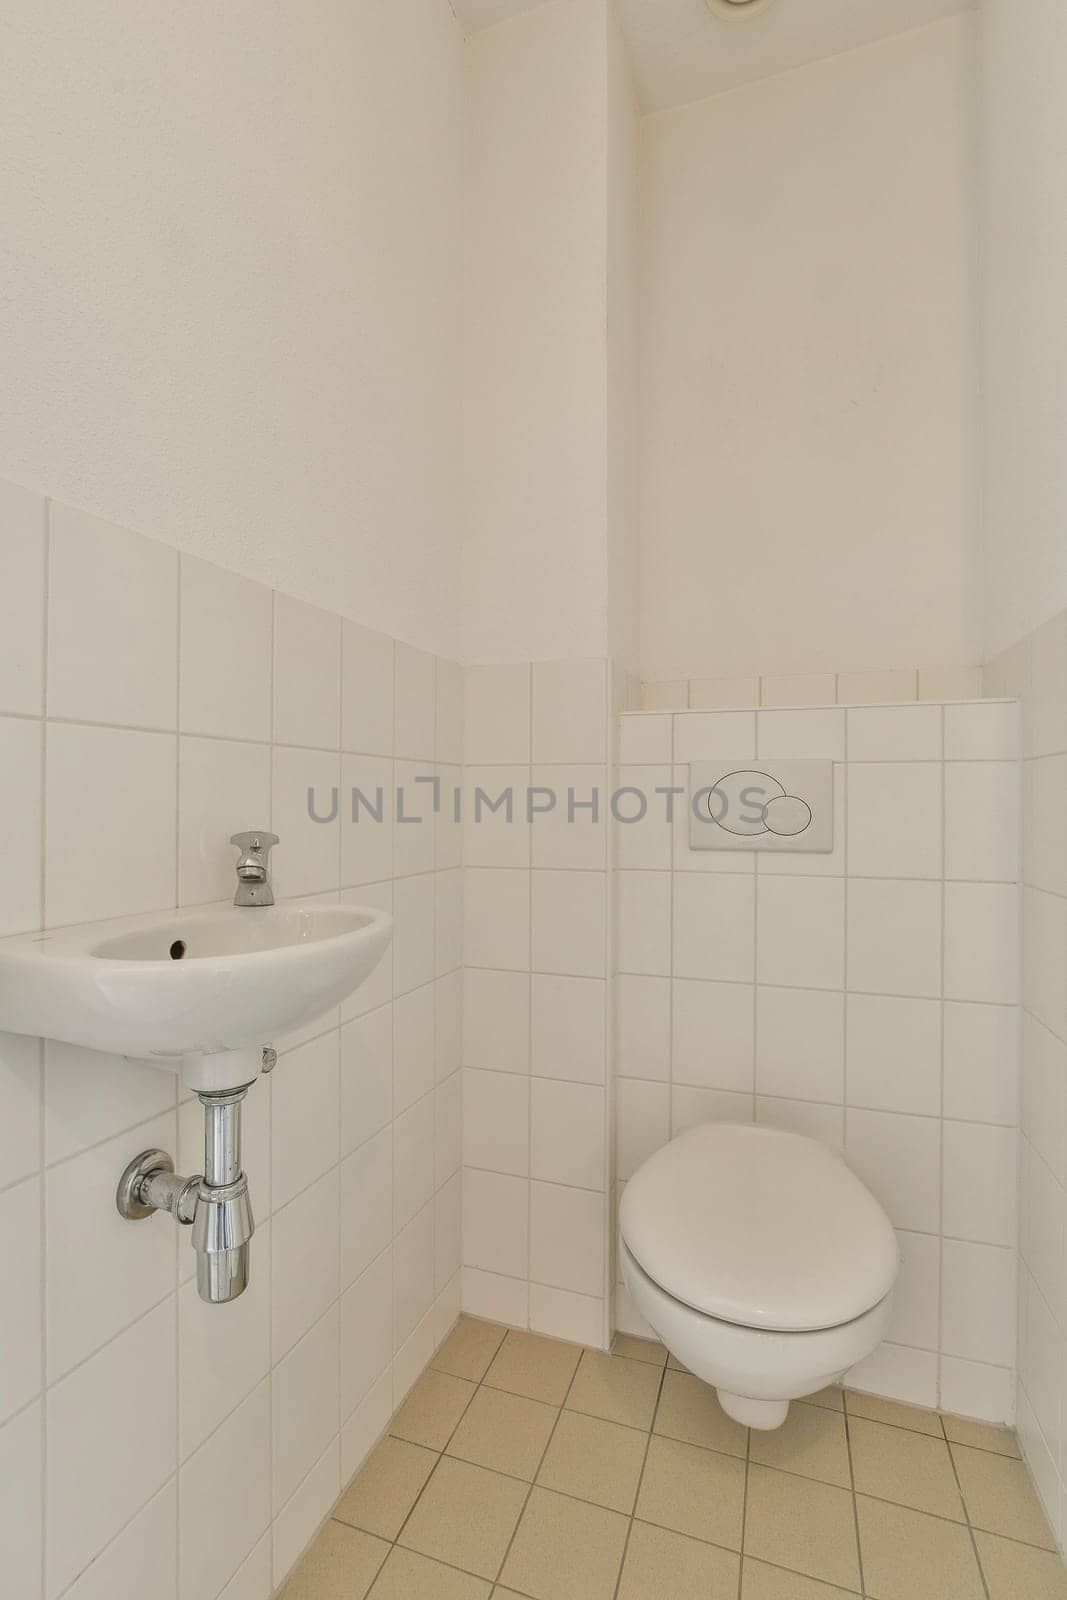 a bathroom with white tiles on the walls, and a toilet bowl in the corner next to the sink basin